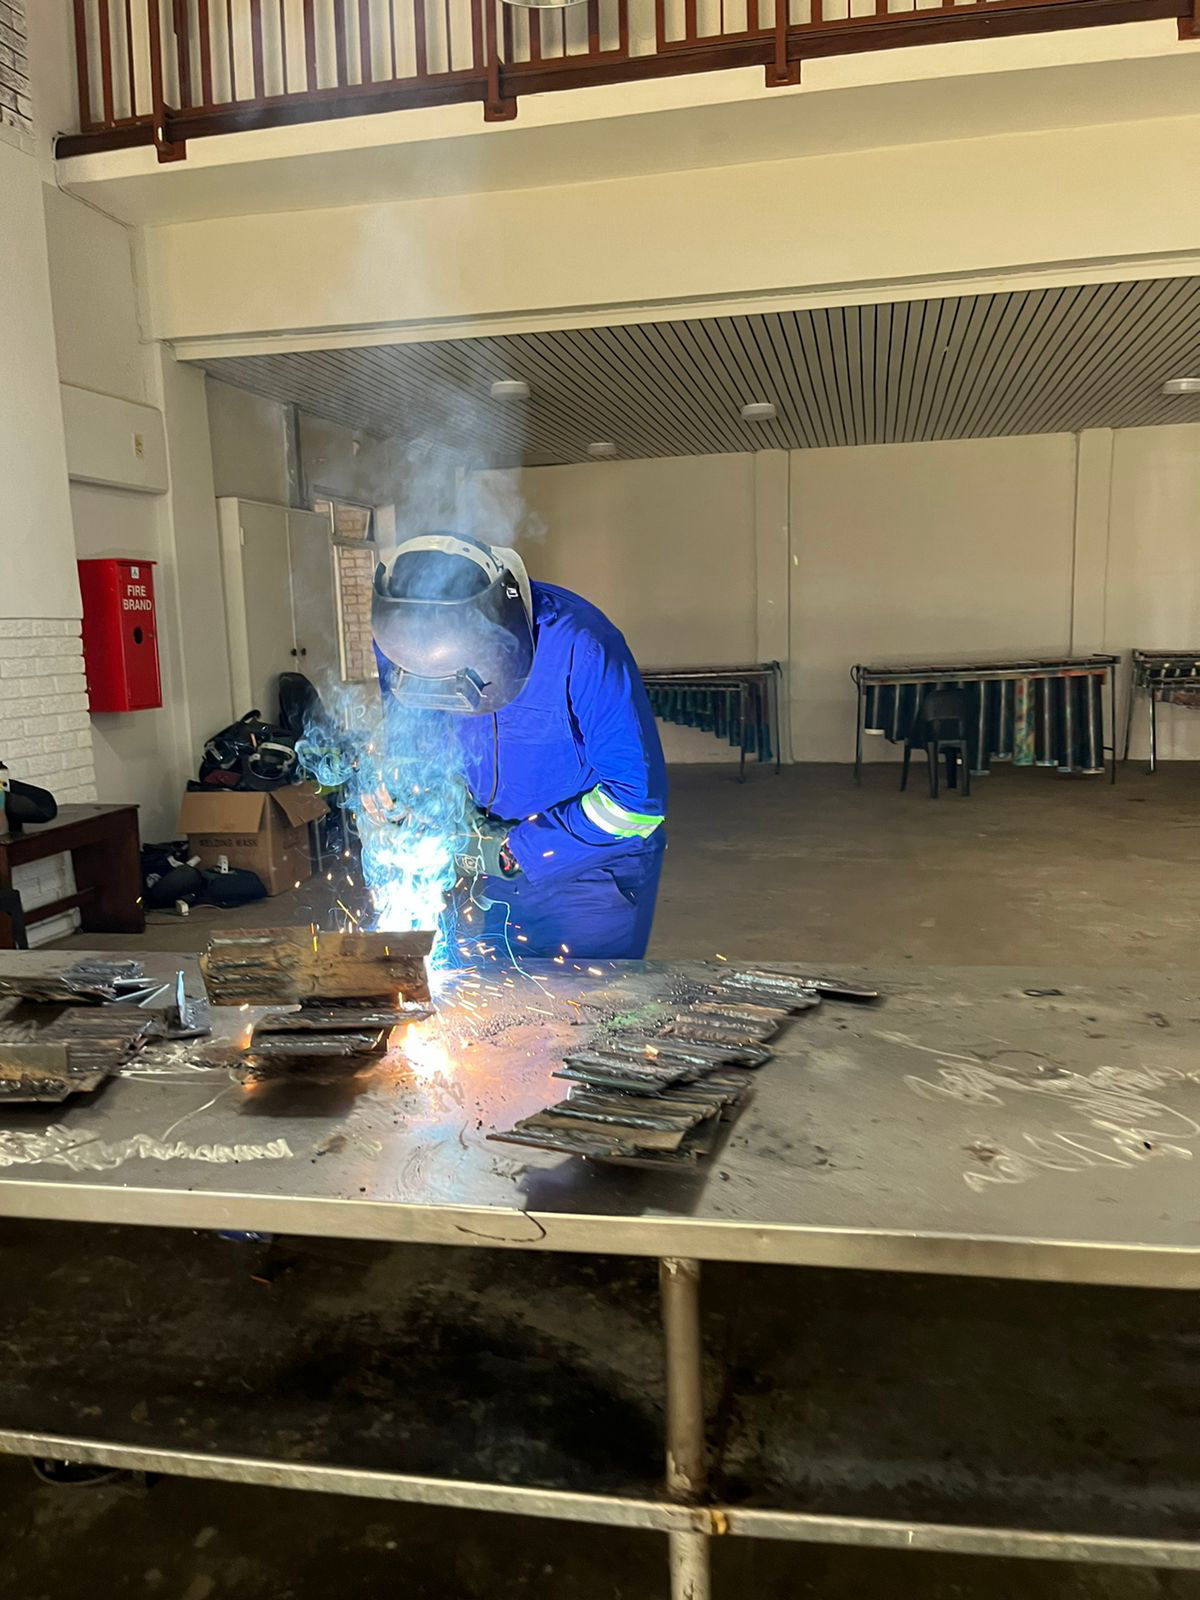 Along with hands-on training in Outreach Foundation's welding classes, students also learn the theory behind it all.